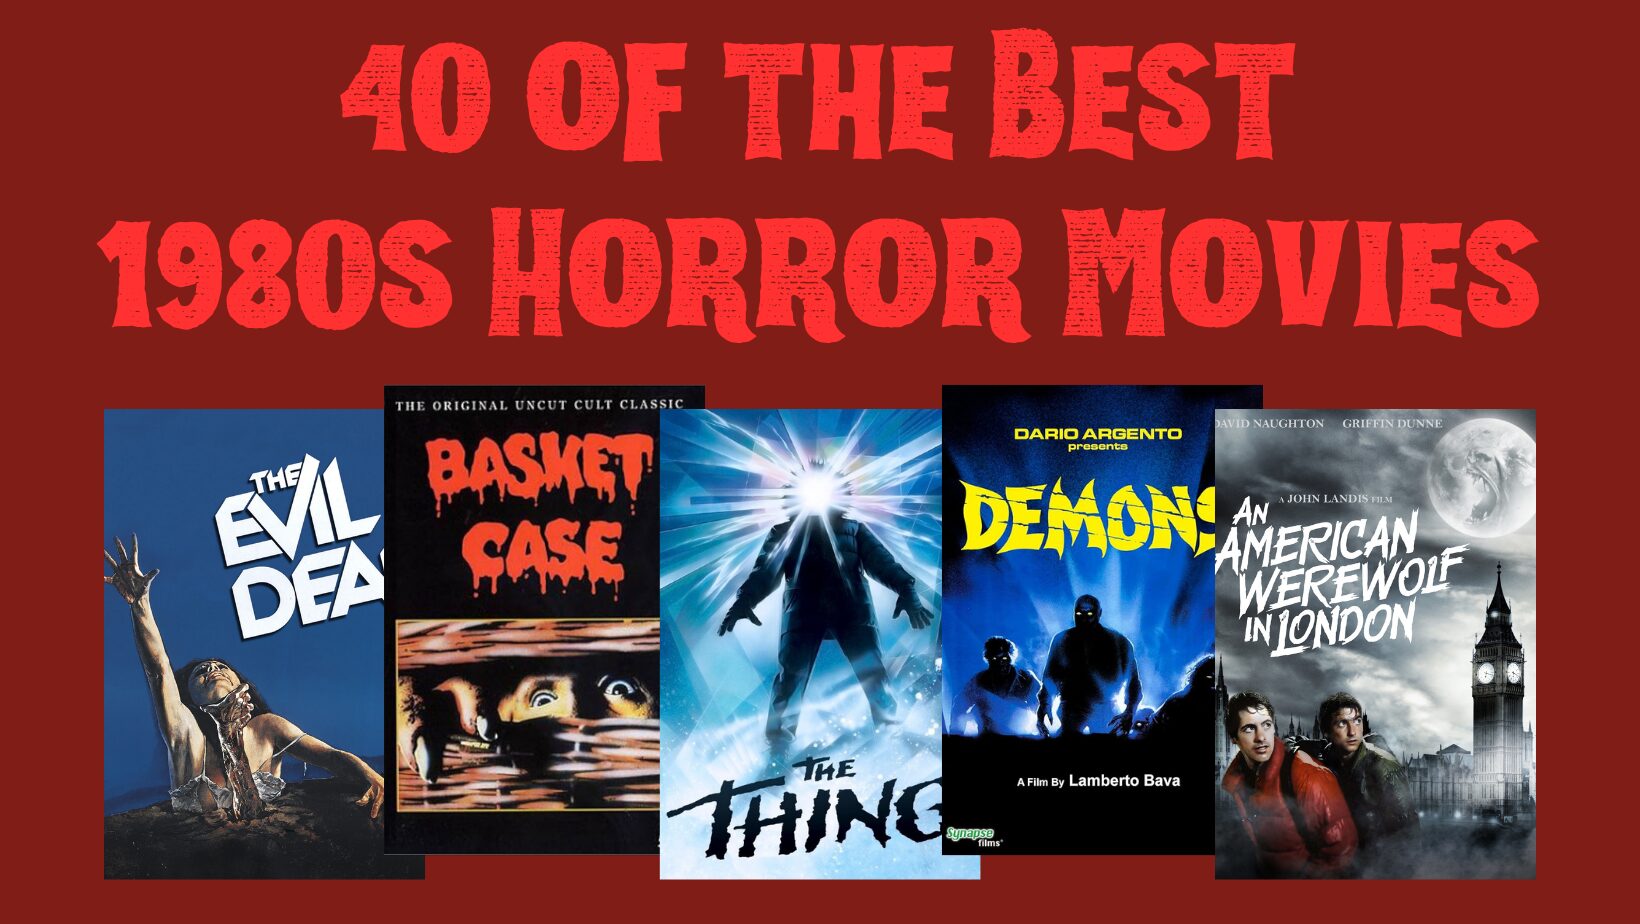 The 40 Best 1980s Horror Movies: Nostalgic Throwback Cult Classic 80s Horror